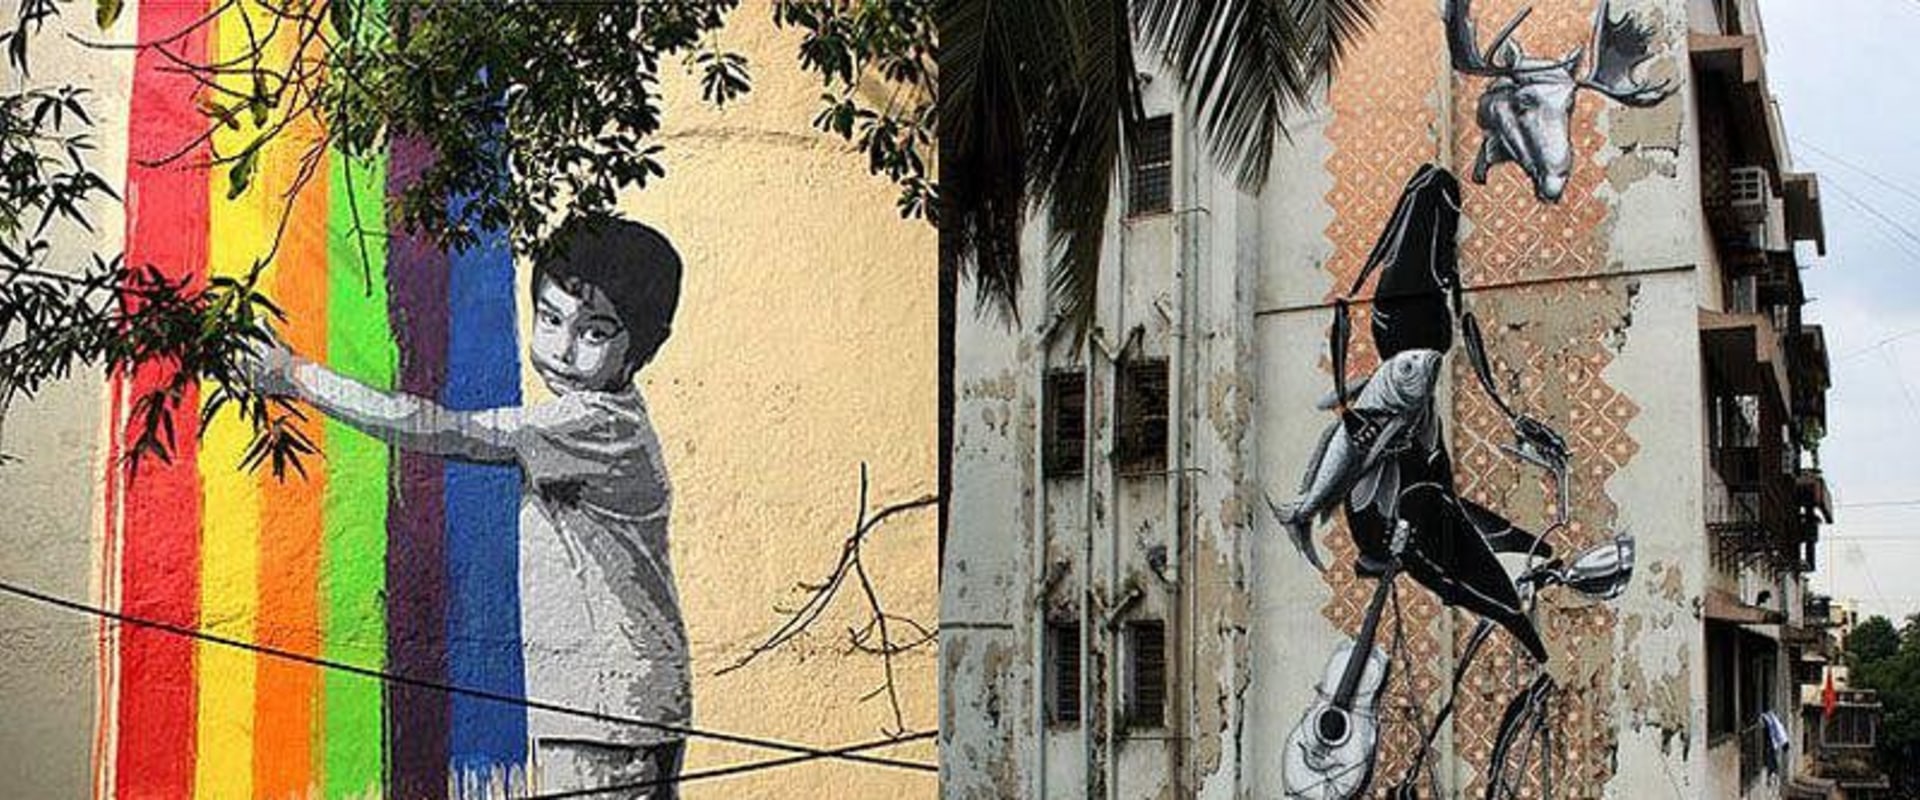 The Most Spectacular Street Art Cities Around the World